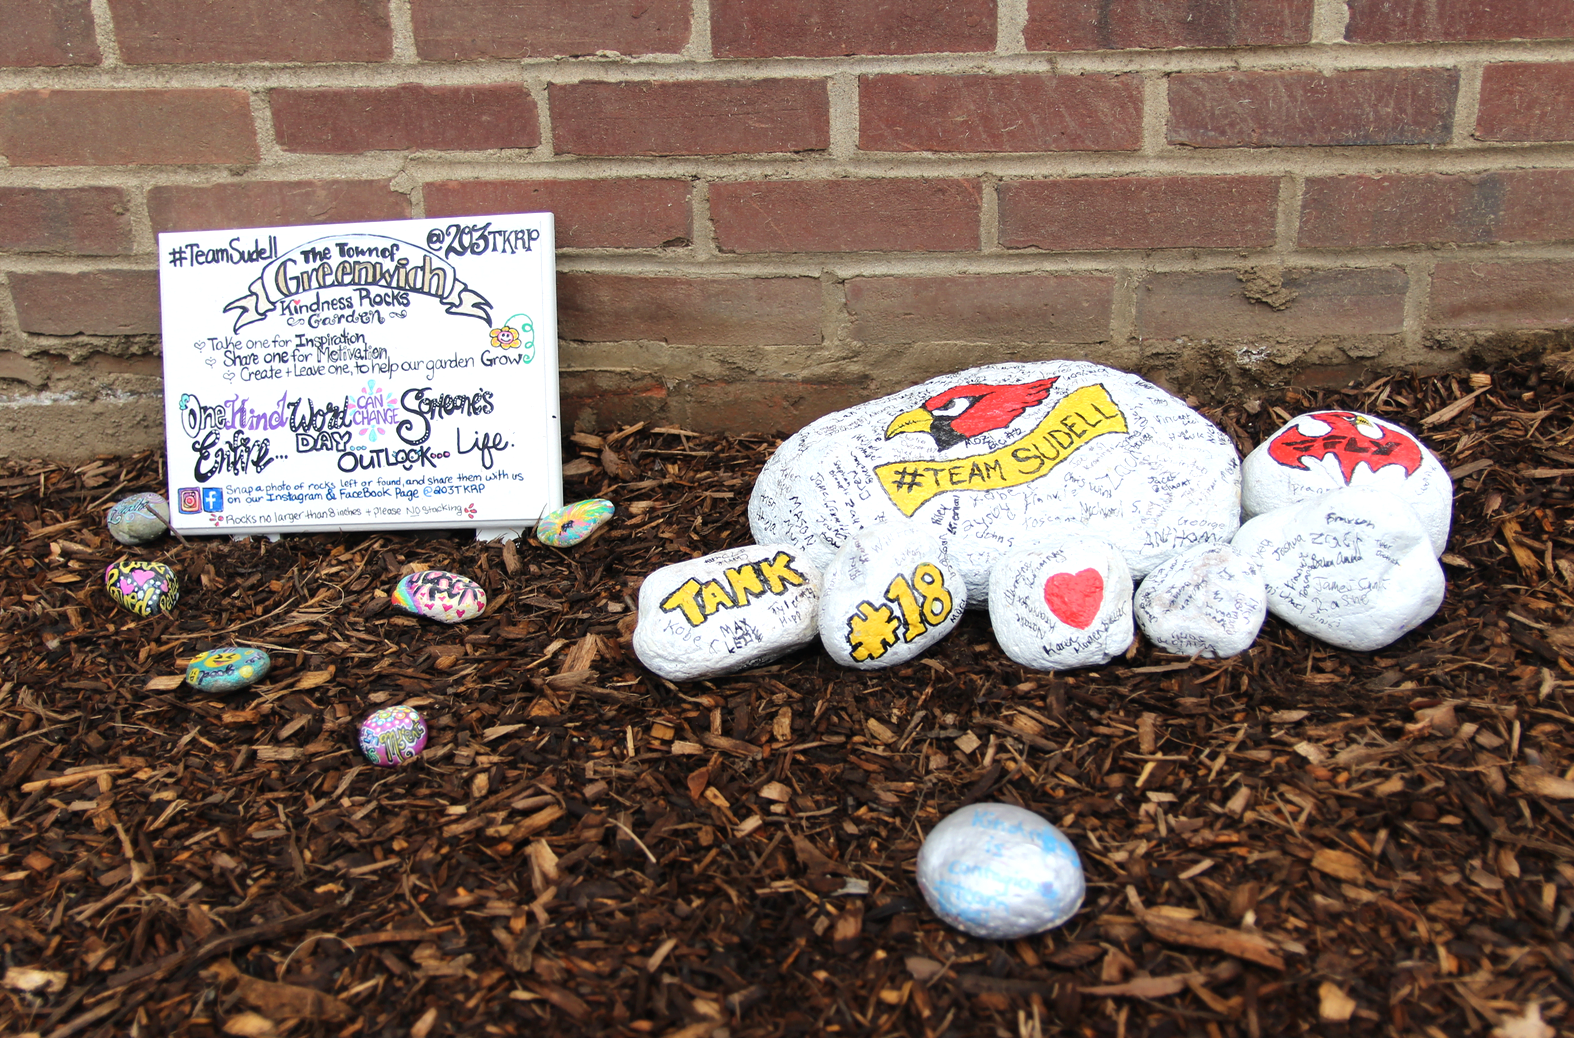 Kindness rocks painted by the GHS football team were put in place at the opening of the kindness rocks healing garden at Greenwich Town Hall. Friday, Sept 7, 2018 Photo: Leslie Yager